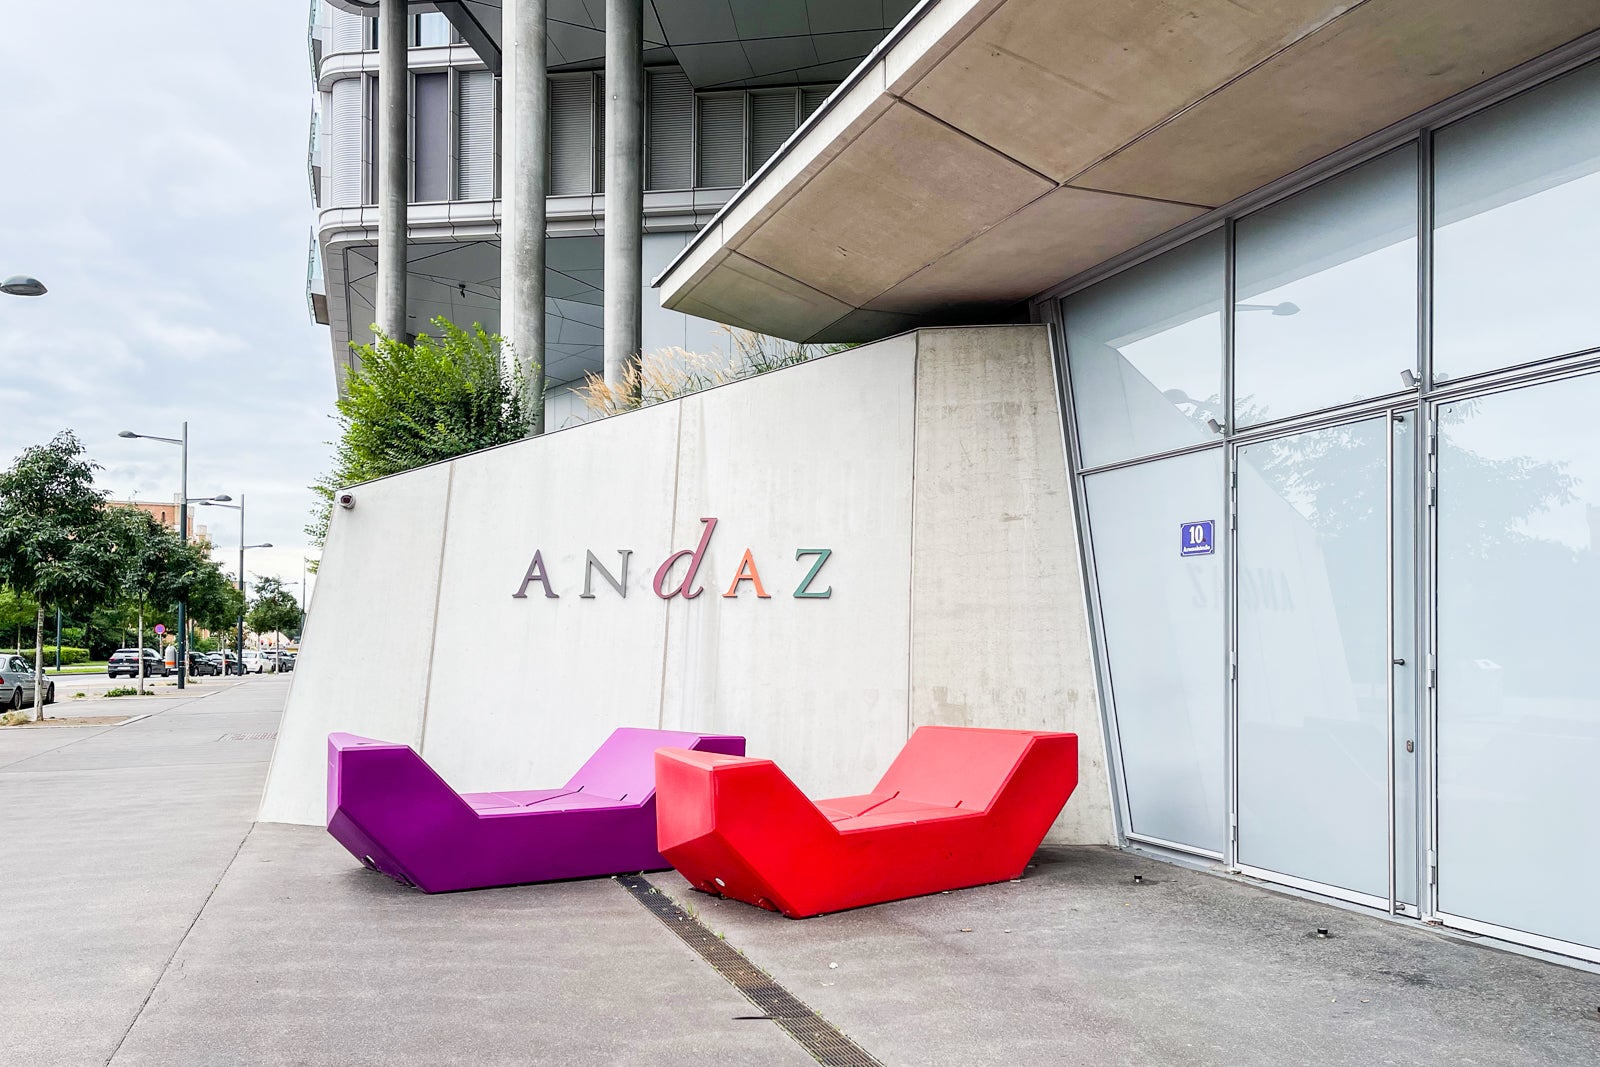 Purple and red benches at the Andaz Vienna entrance